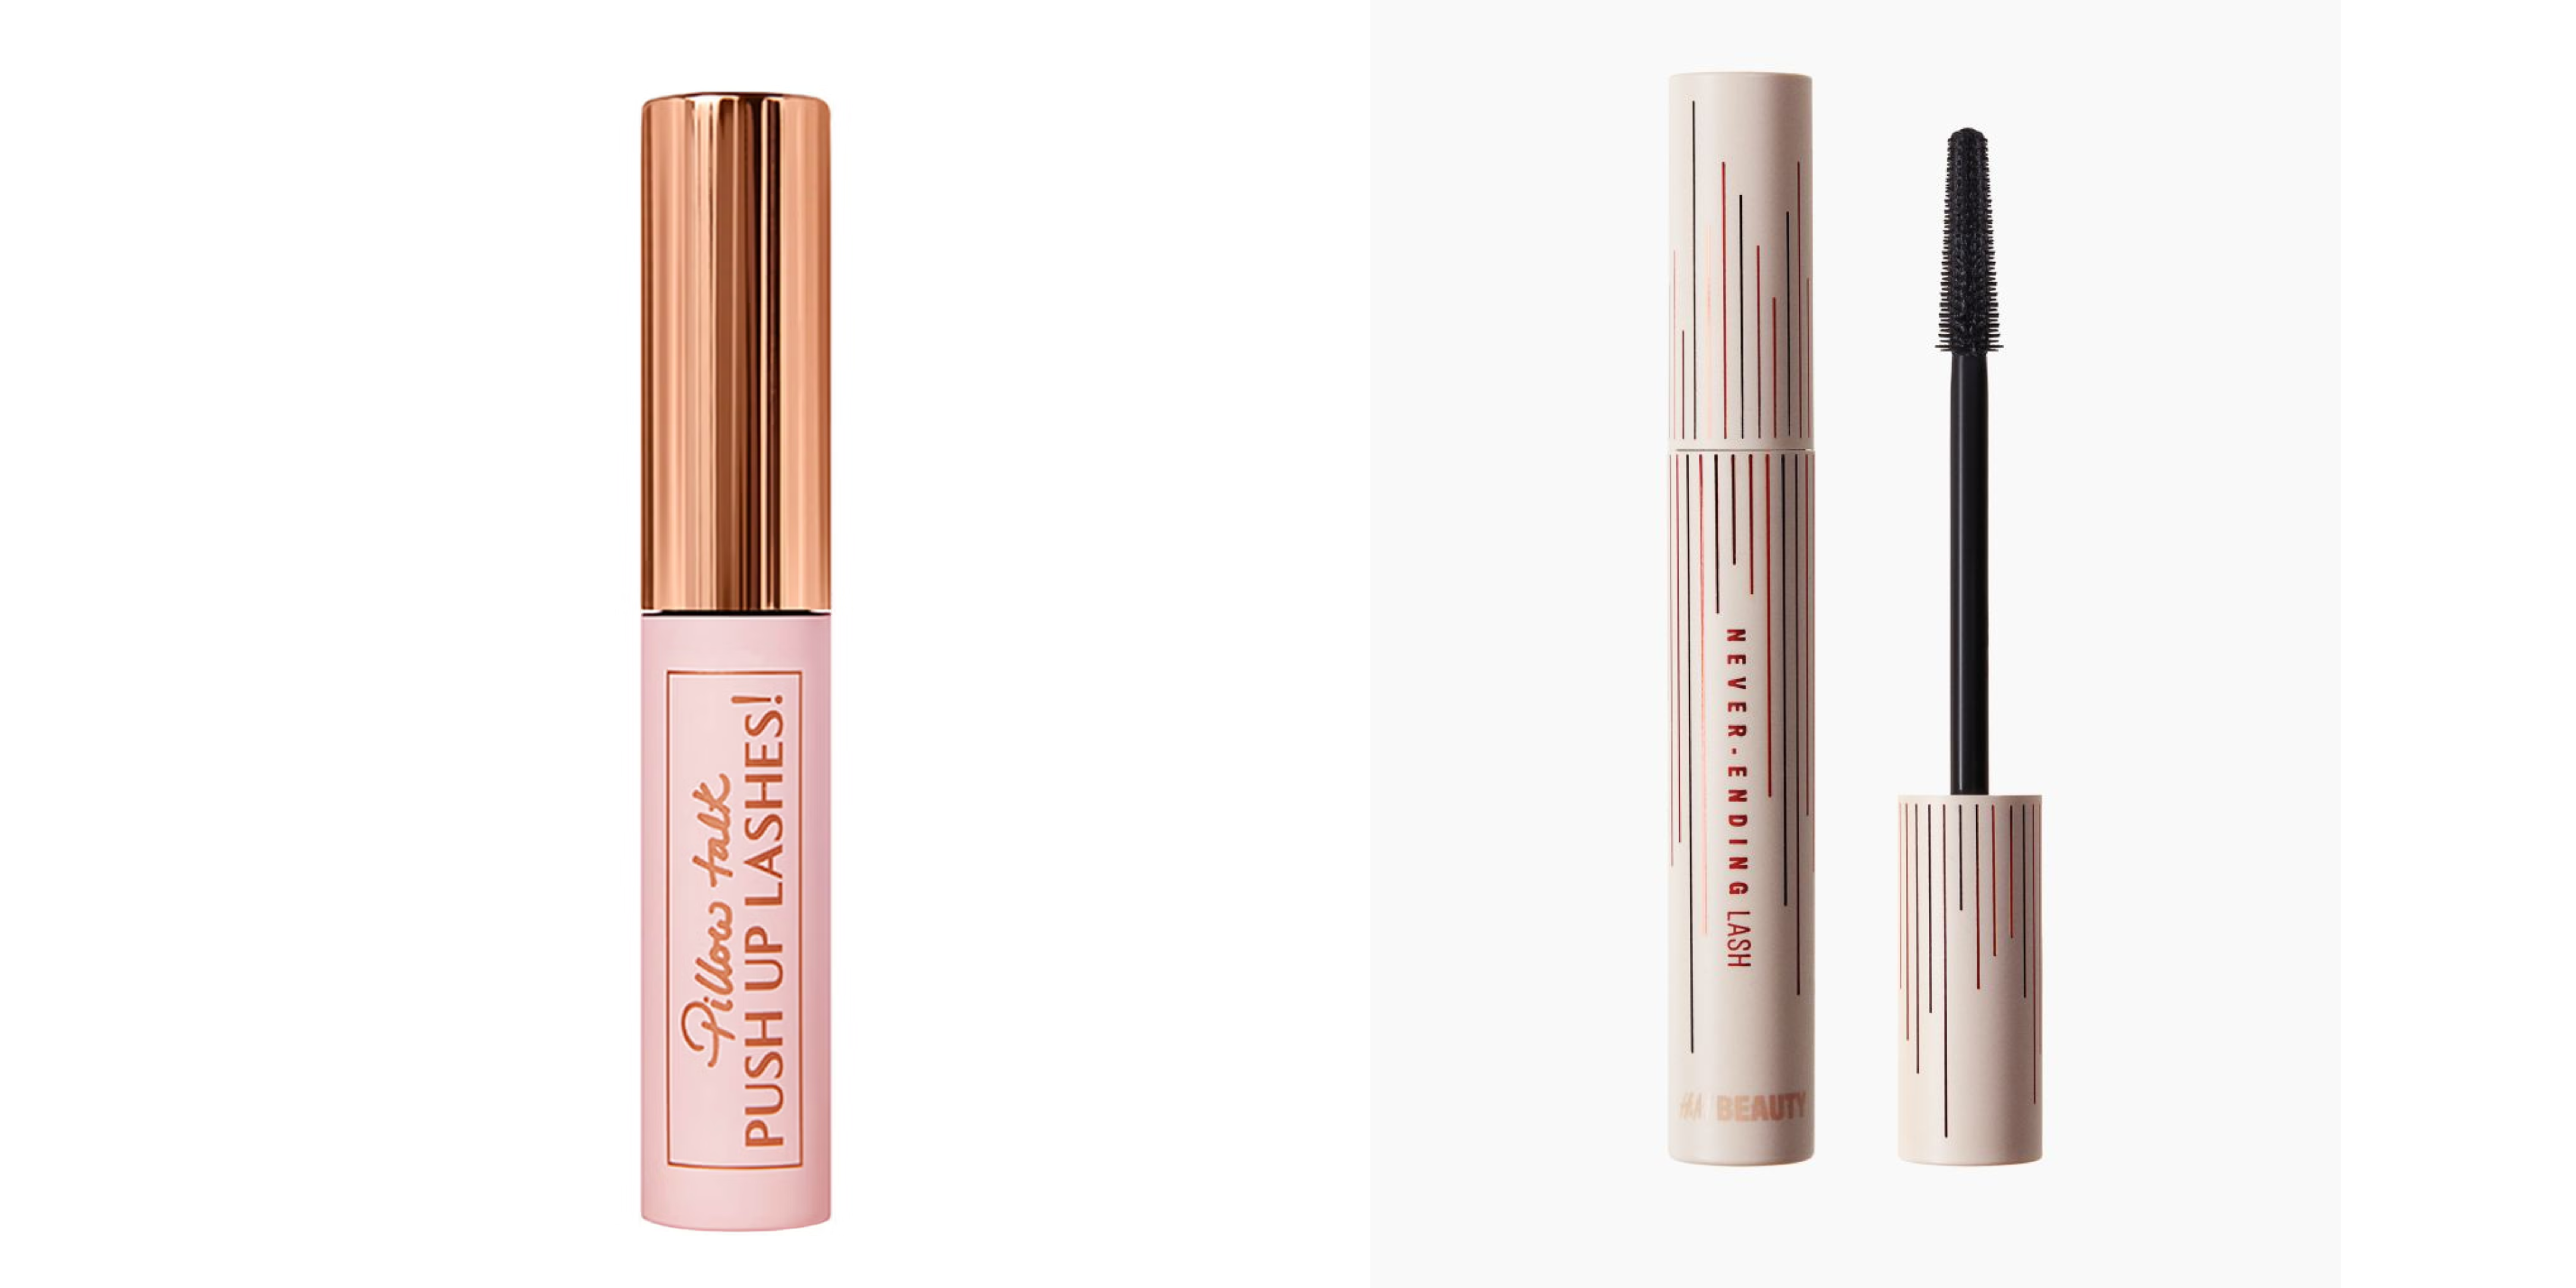 Lift lashes to new heights with these mascaras